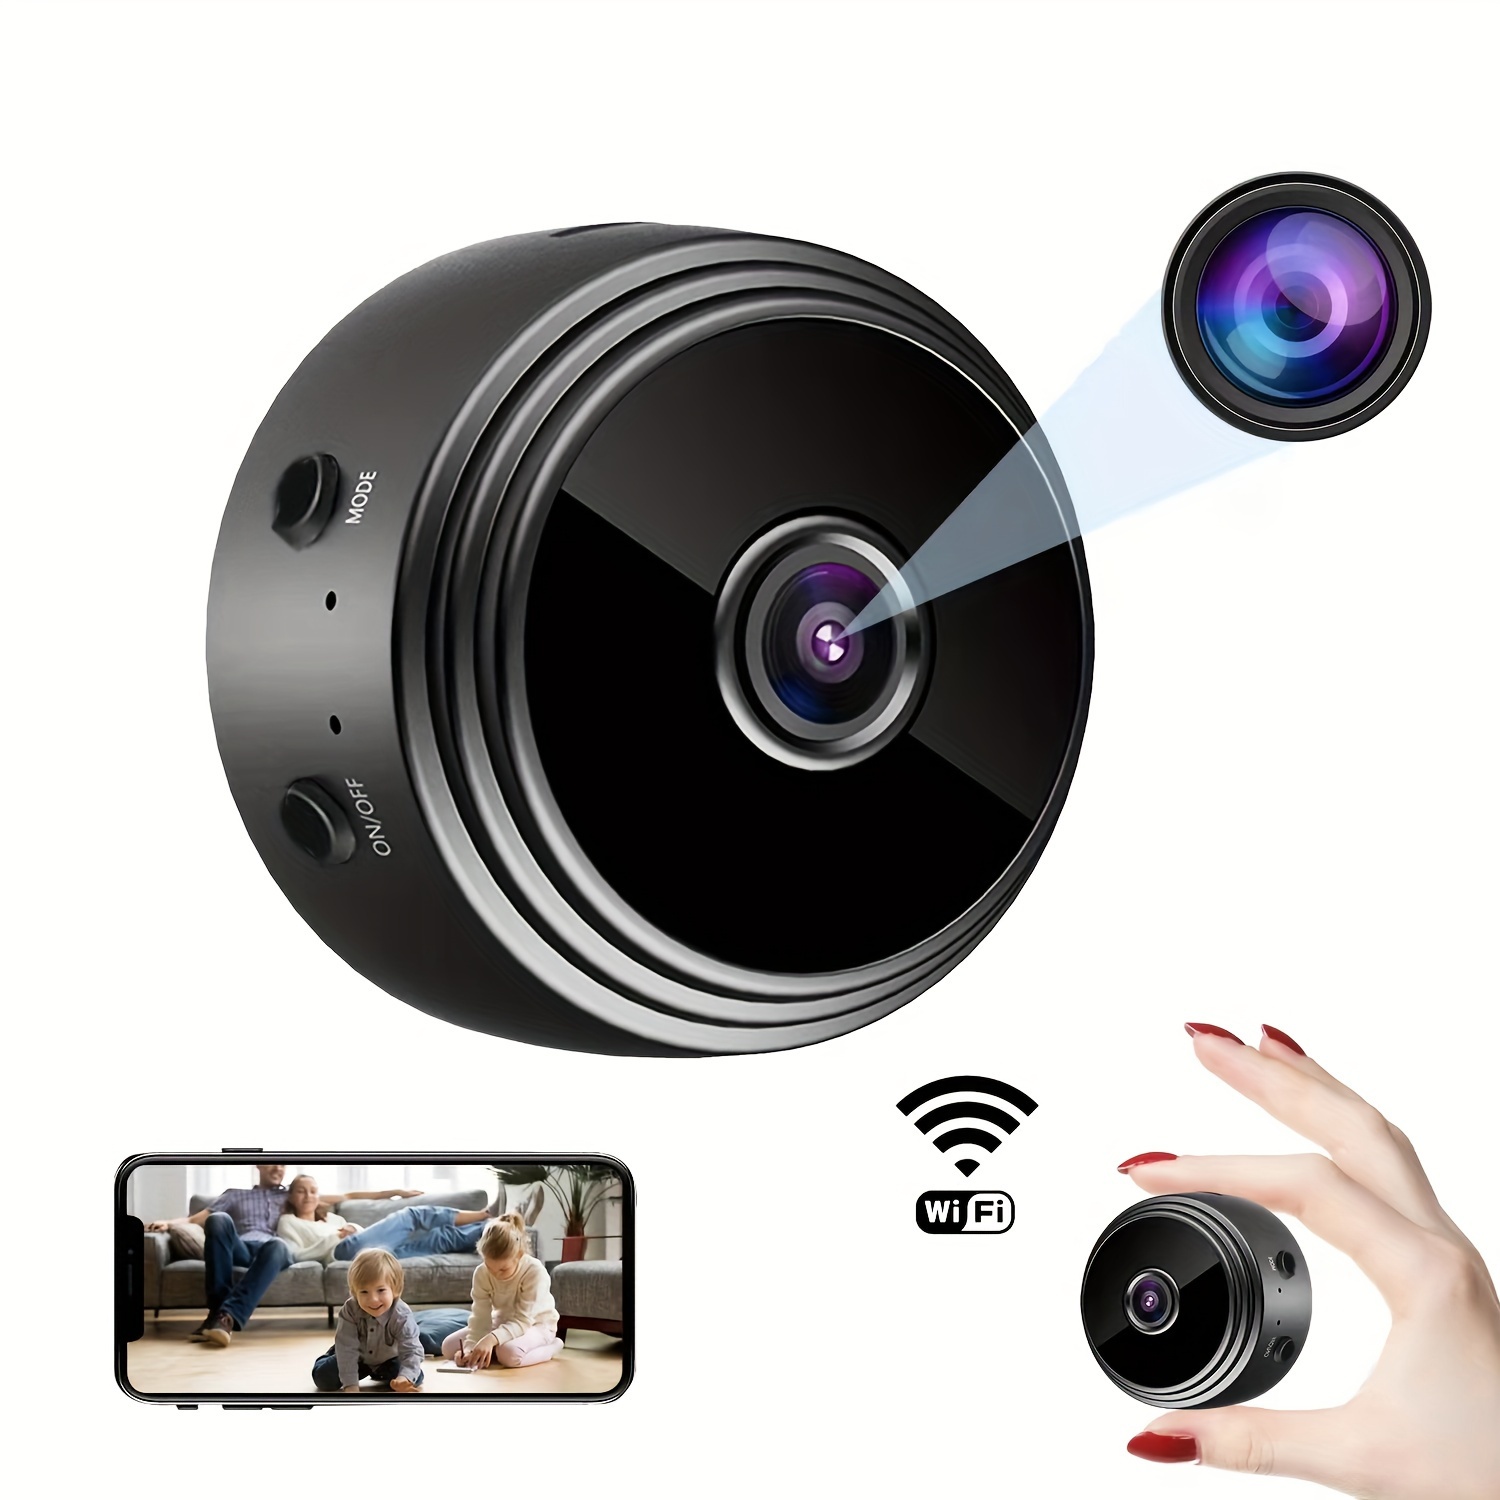 

1pc Camera Wifi Ip Camera, Smart Home Security Ir Night Vision Wireless Small Camera, Video Monitoring, Cctv Camera (without Sd Card)